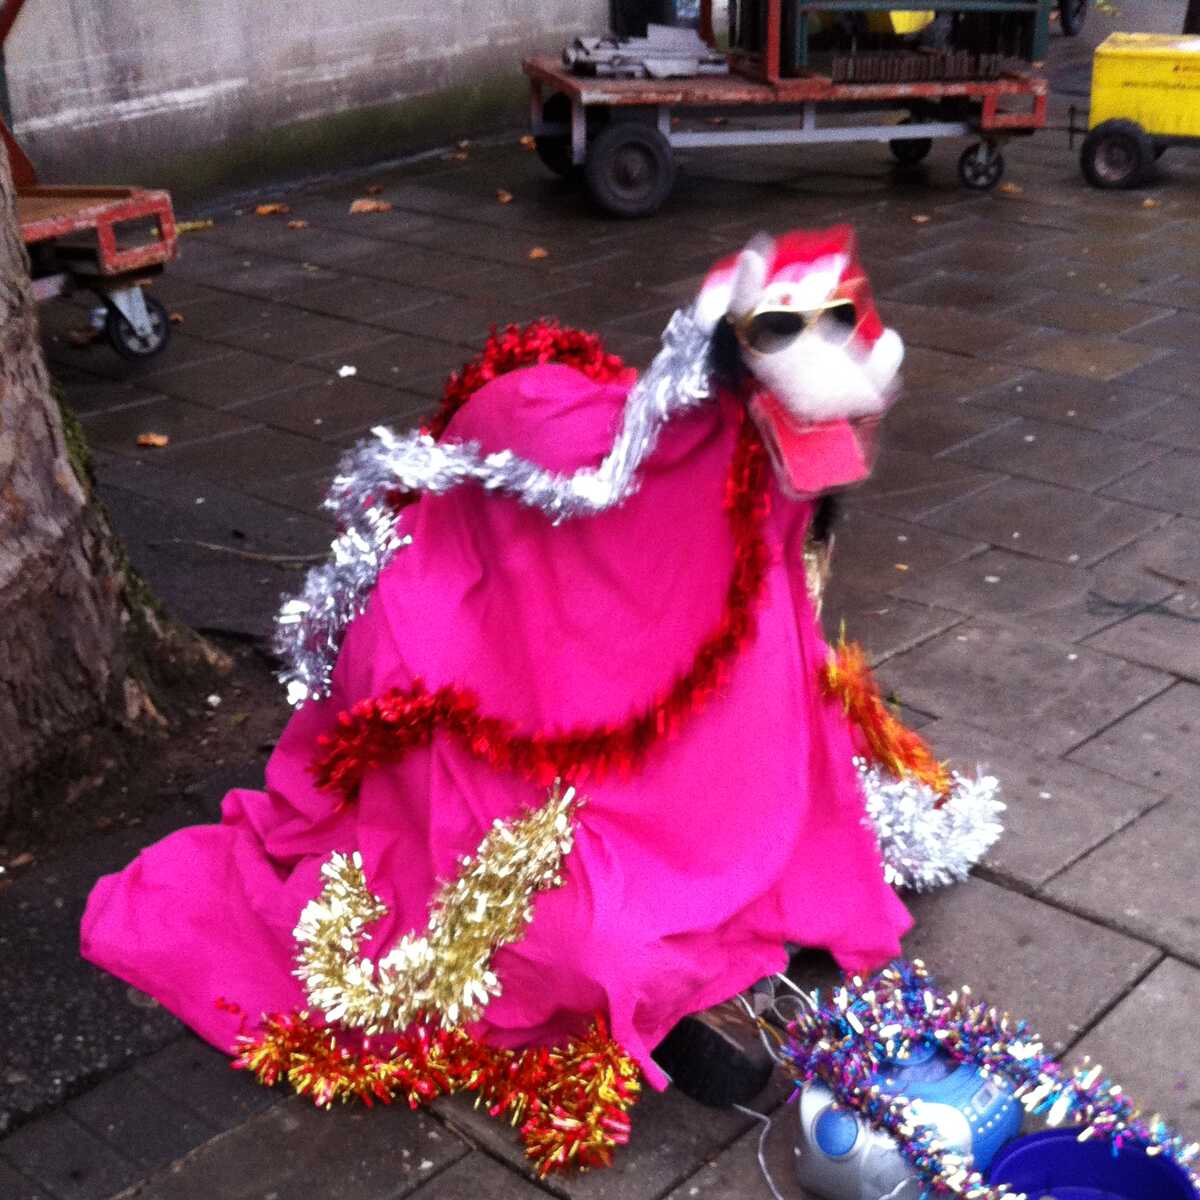 A street performer dressed as a pink dog with a clapping jaw